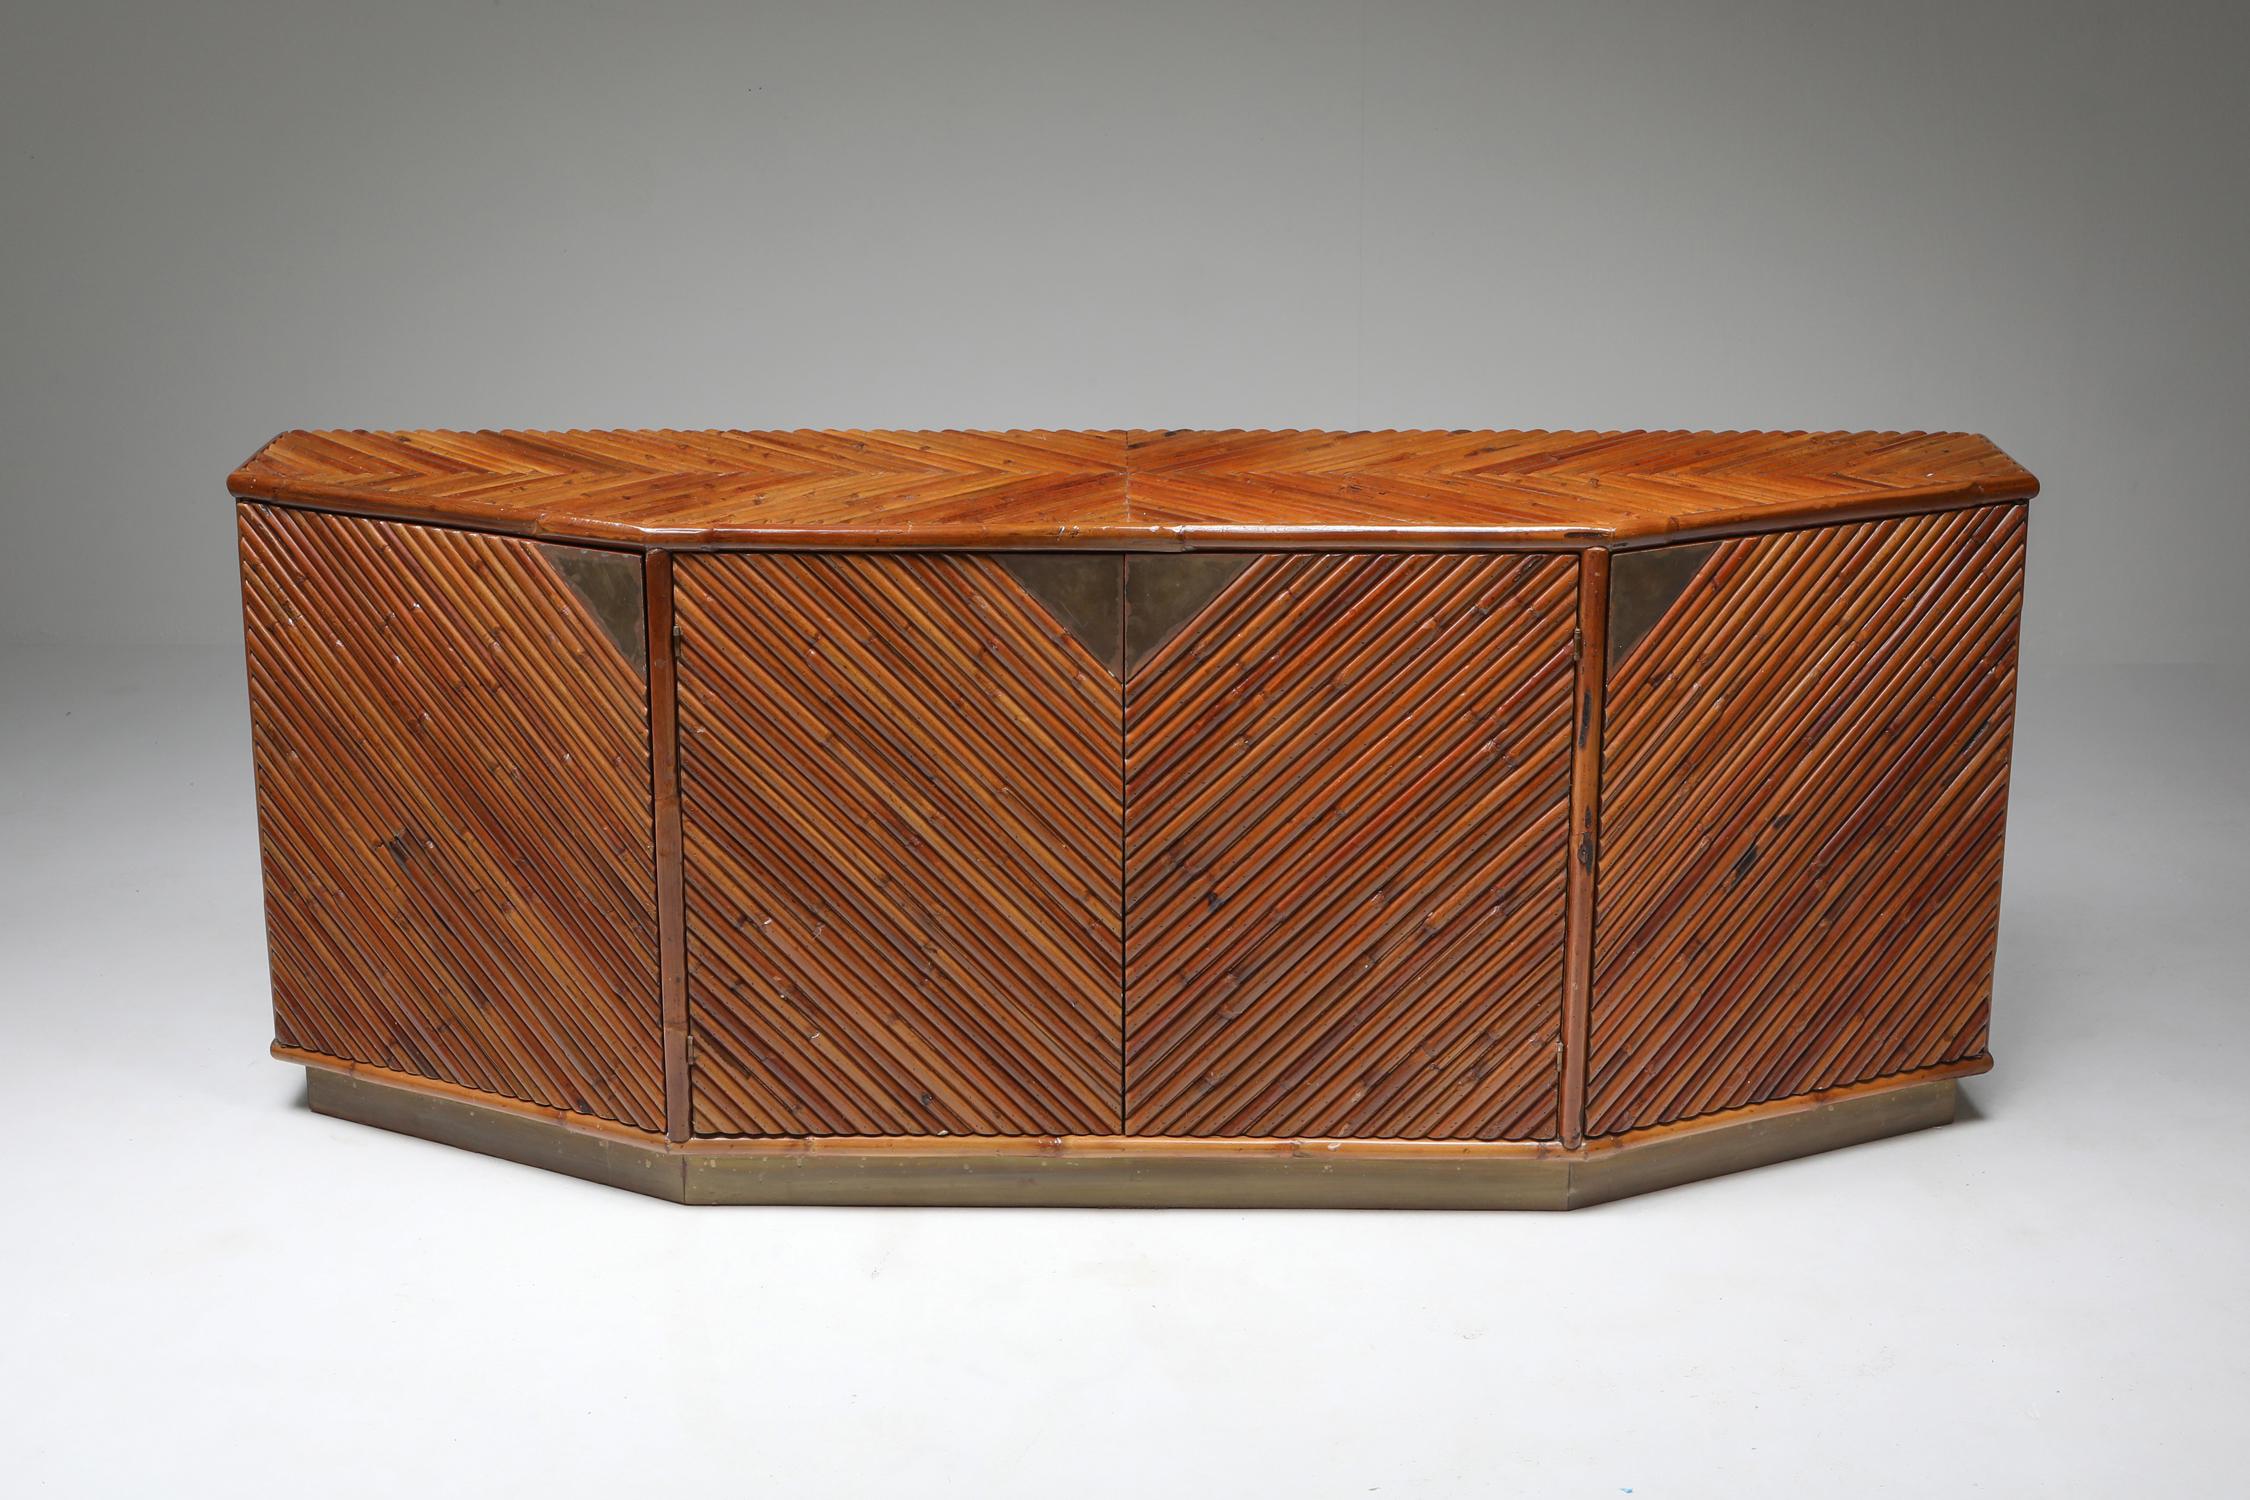 Tropicalist bamboo sideboard by Vivai del Sud, Italy, 1970s. Great Italian glam piece that fits well in an eclectic Hollywood Regency interior. The credenza has four doors with 2 shelves.